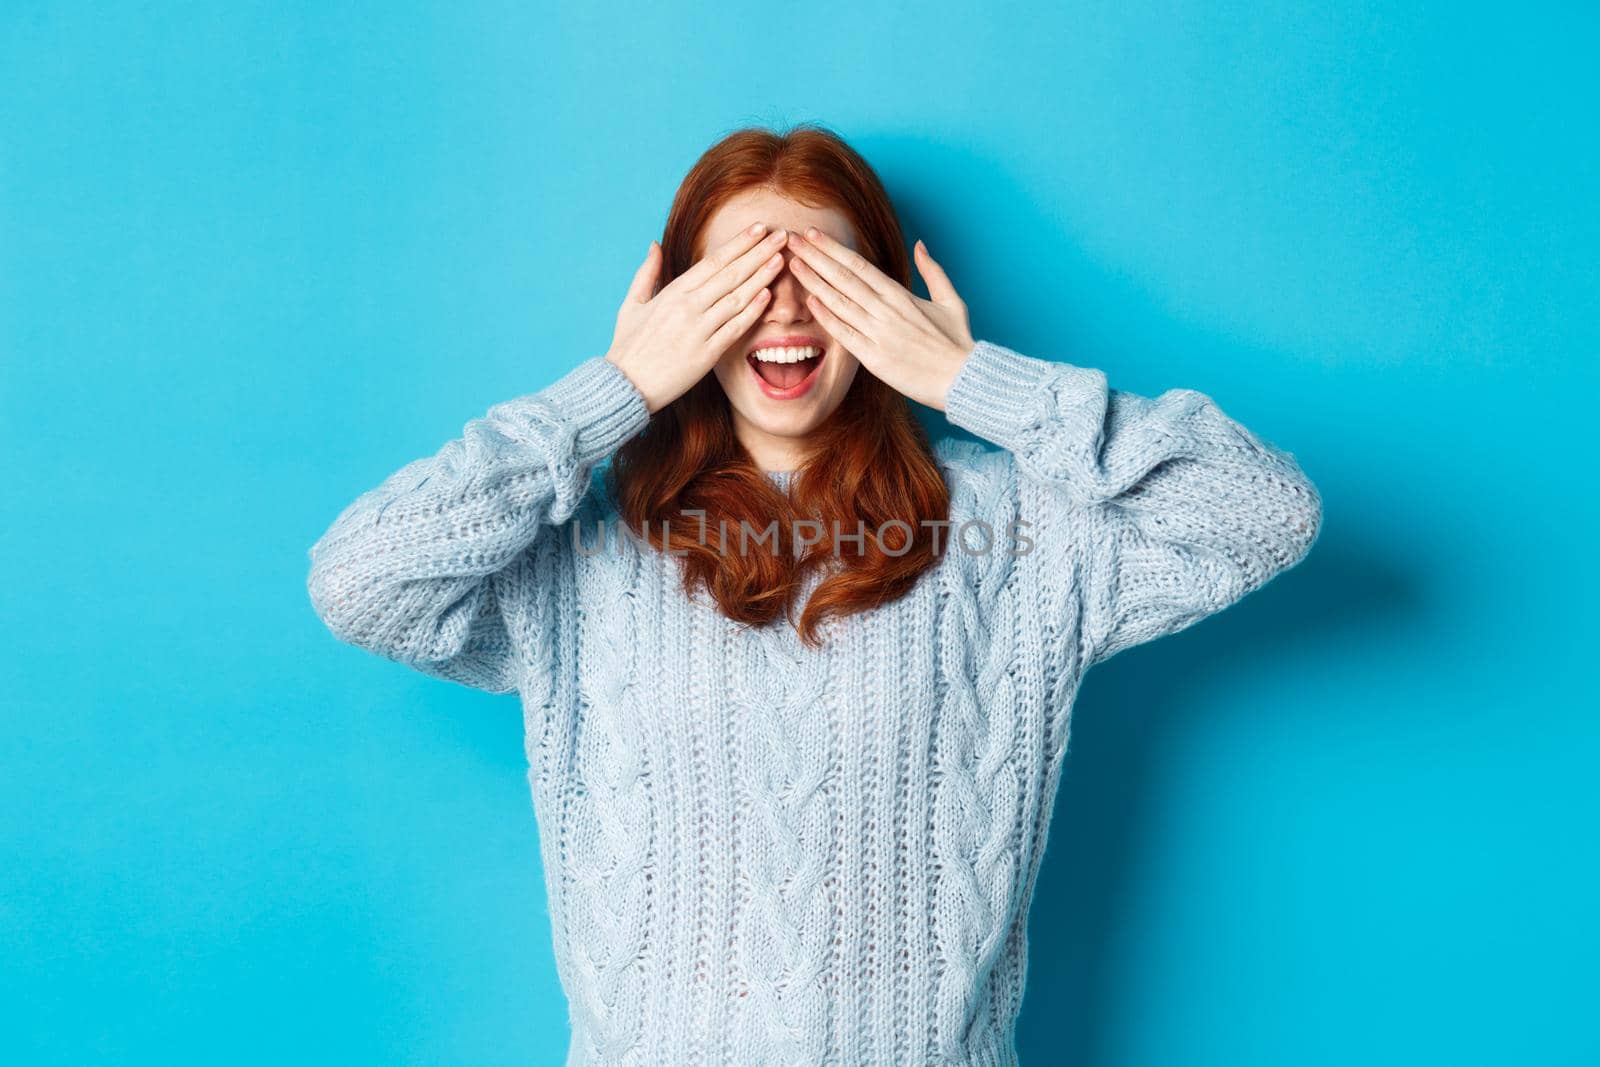 Cheerful redhead female model close eyes and waiting for christmas gift, holding hands on face and smiling amused, anticipating surprise, standing over blue background.